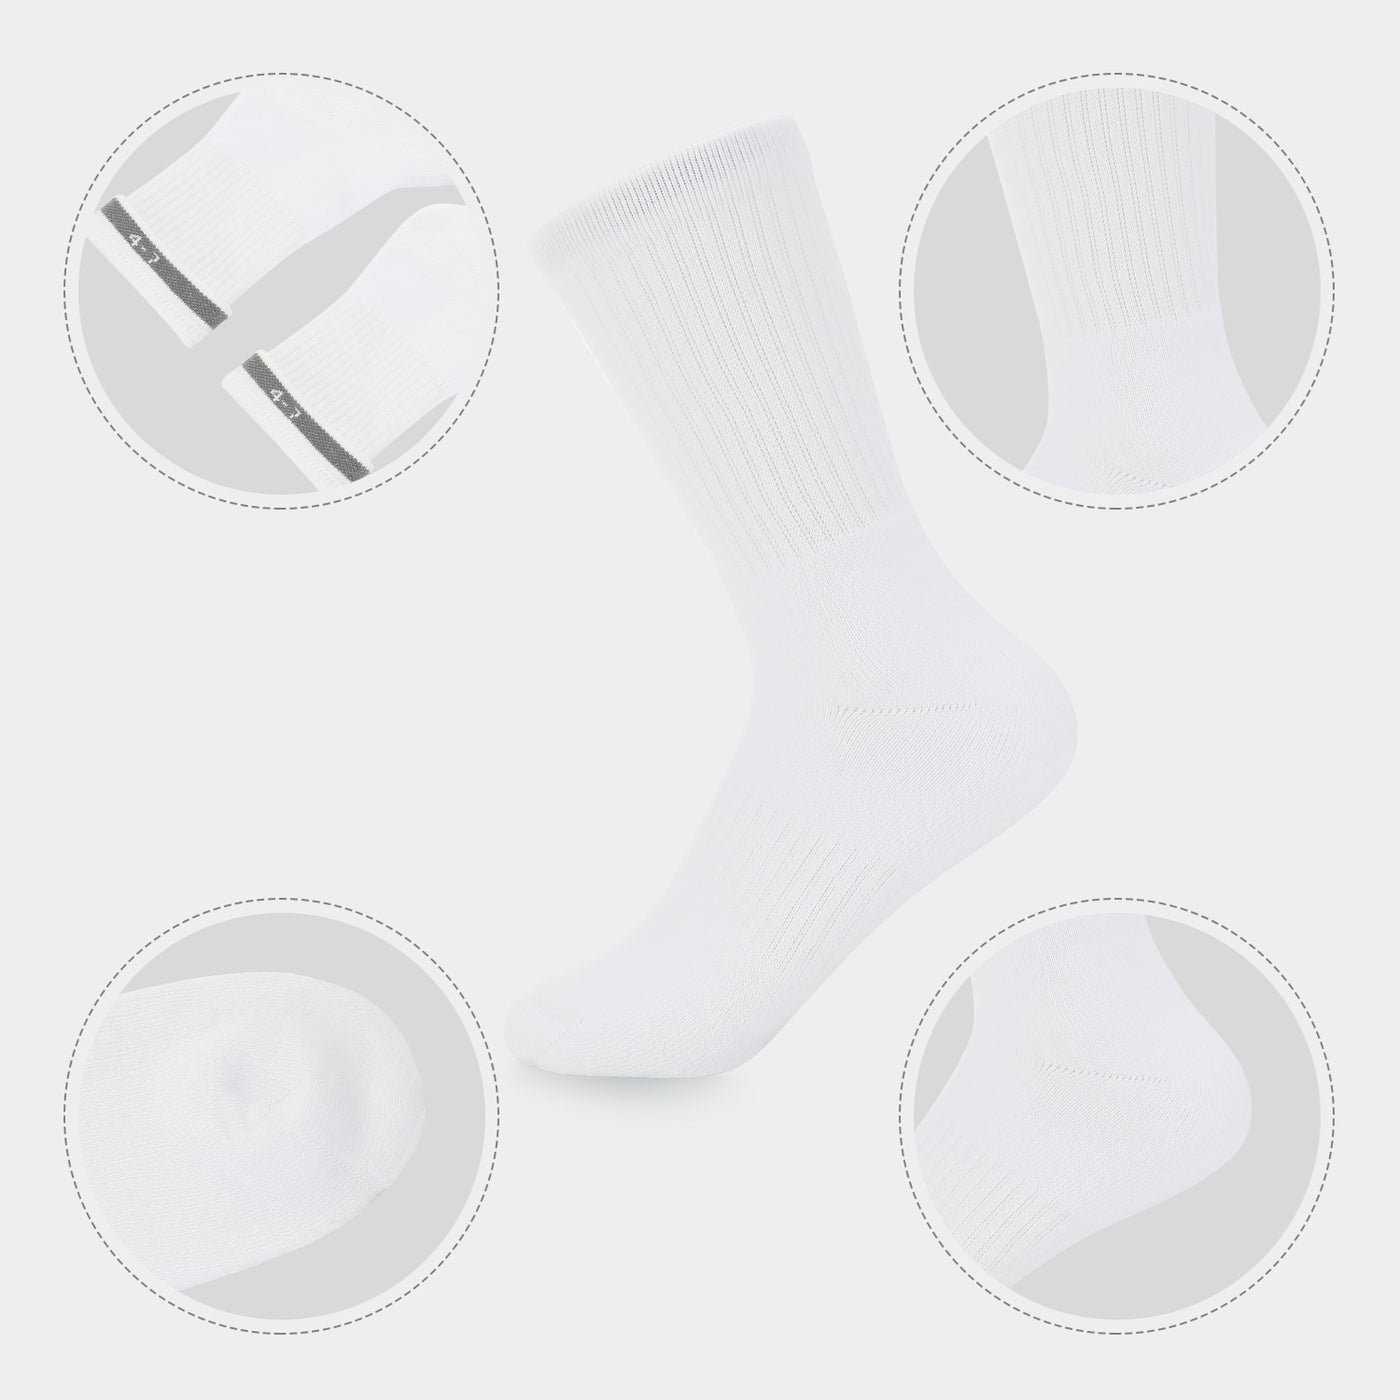 Laulax 5 Pairs Finest Combed Cotton Cushioned Arch Support White PE Sport Socks, 3-18 Years, Gift Set